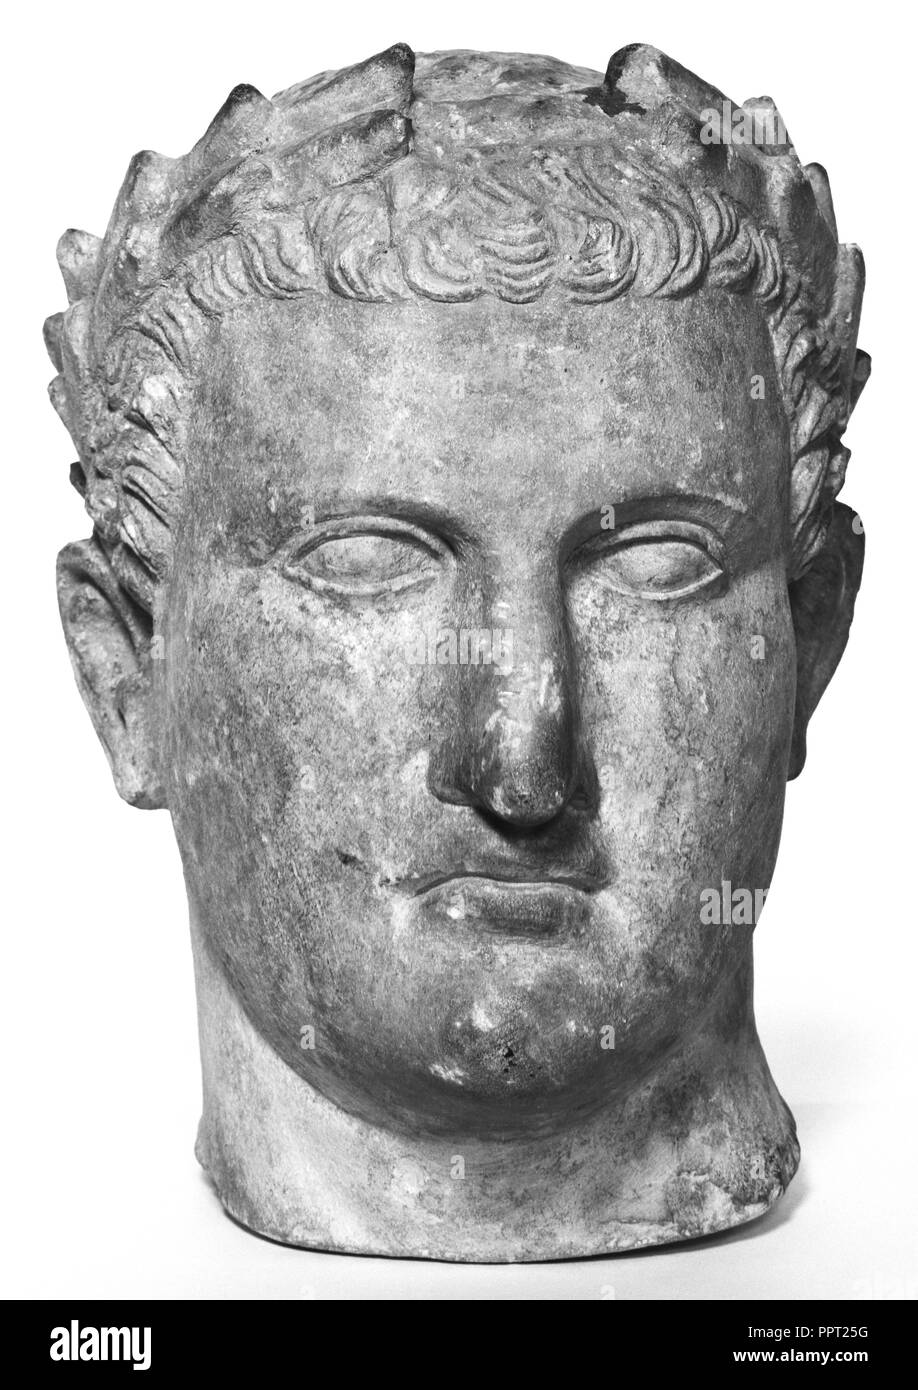 Portrait Head of a Ruler; Nicosia, Cyprus; early 1st century; Limestone with Polychrome; 29 × 20.3 × 28 cm, 11 7,16 × 8 × 11 in Stock Photo